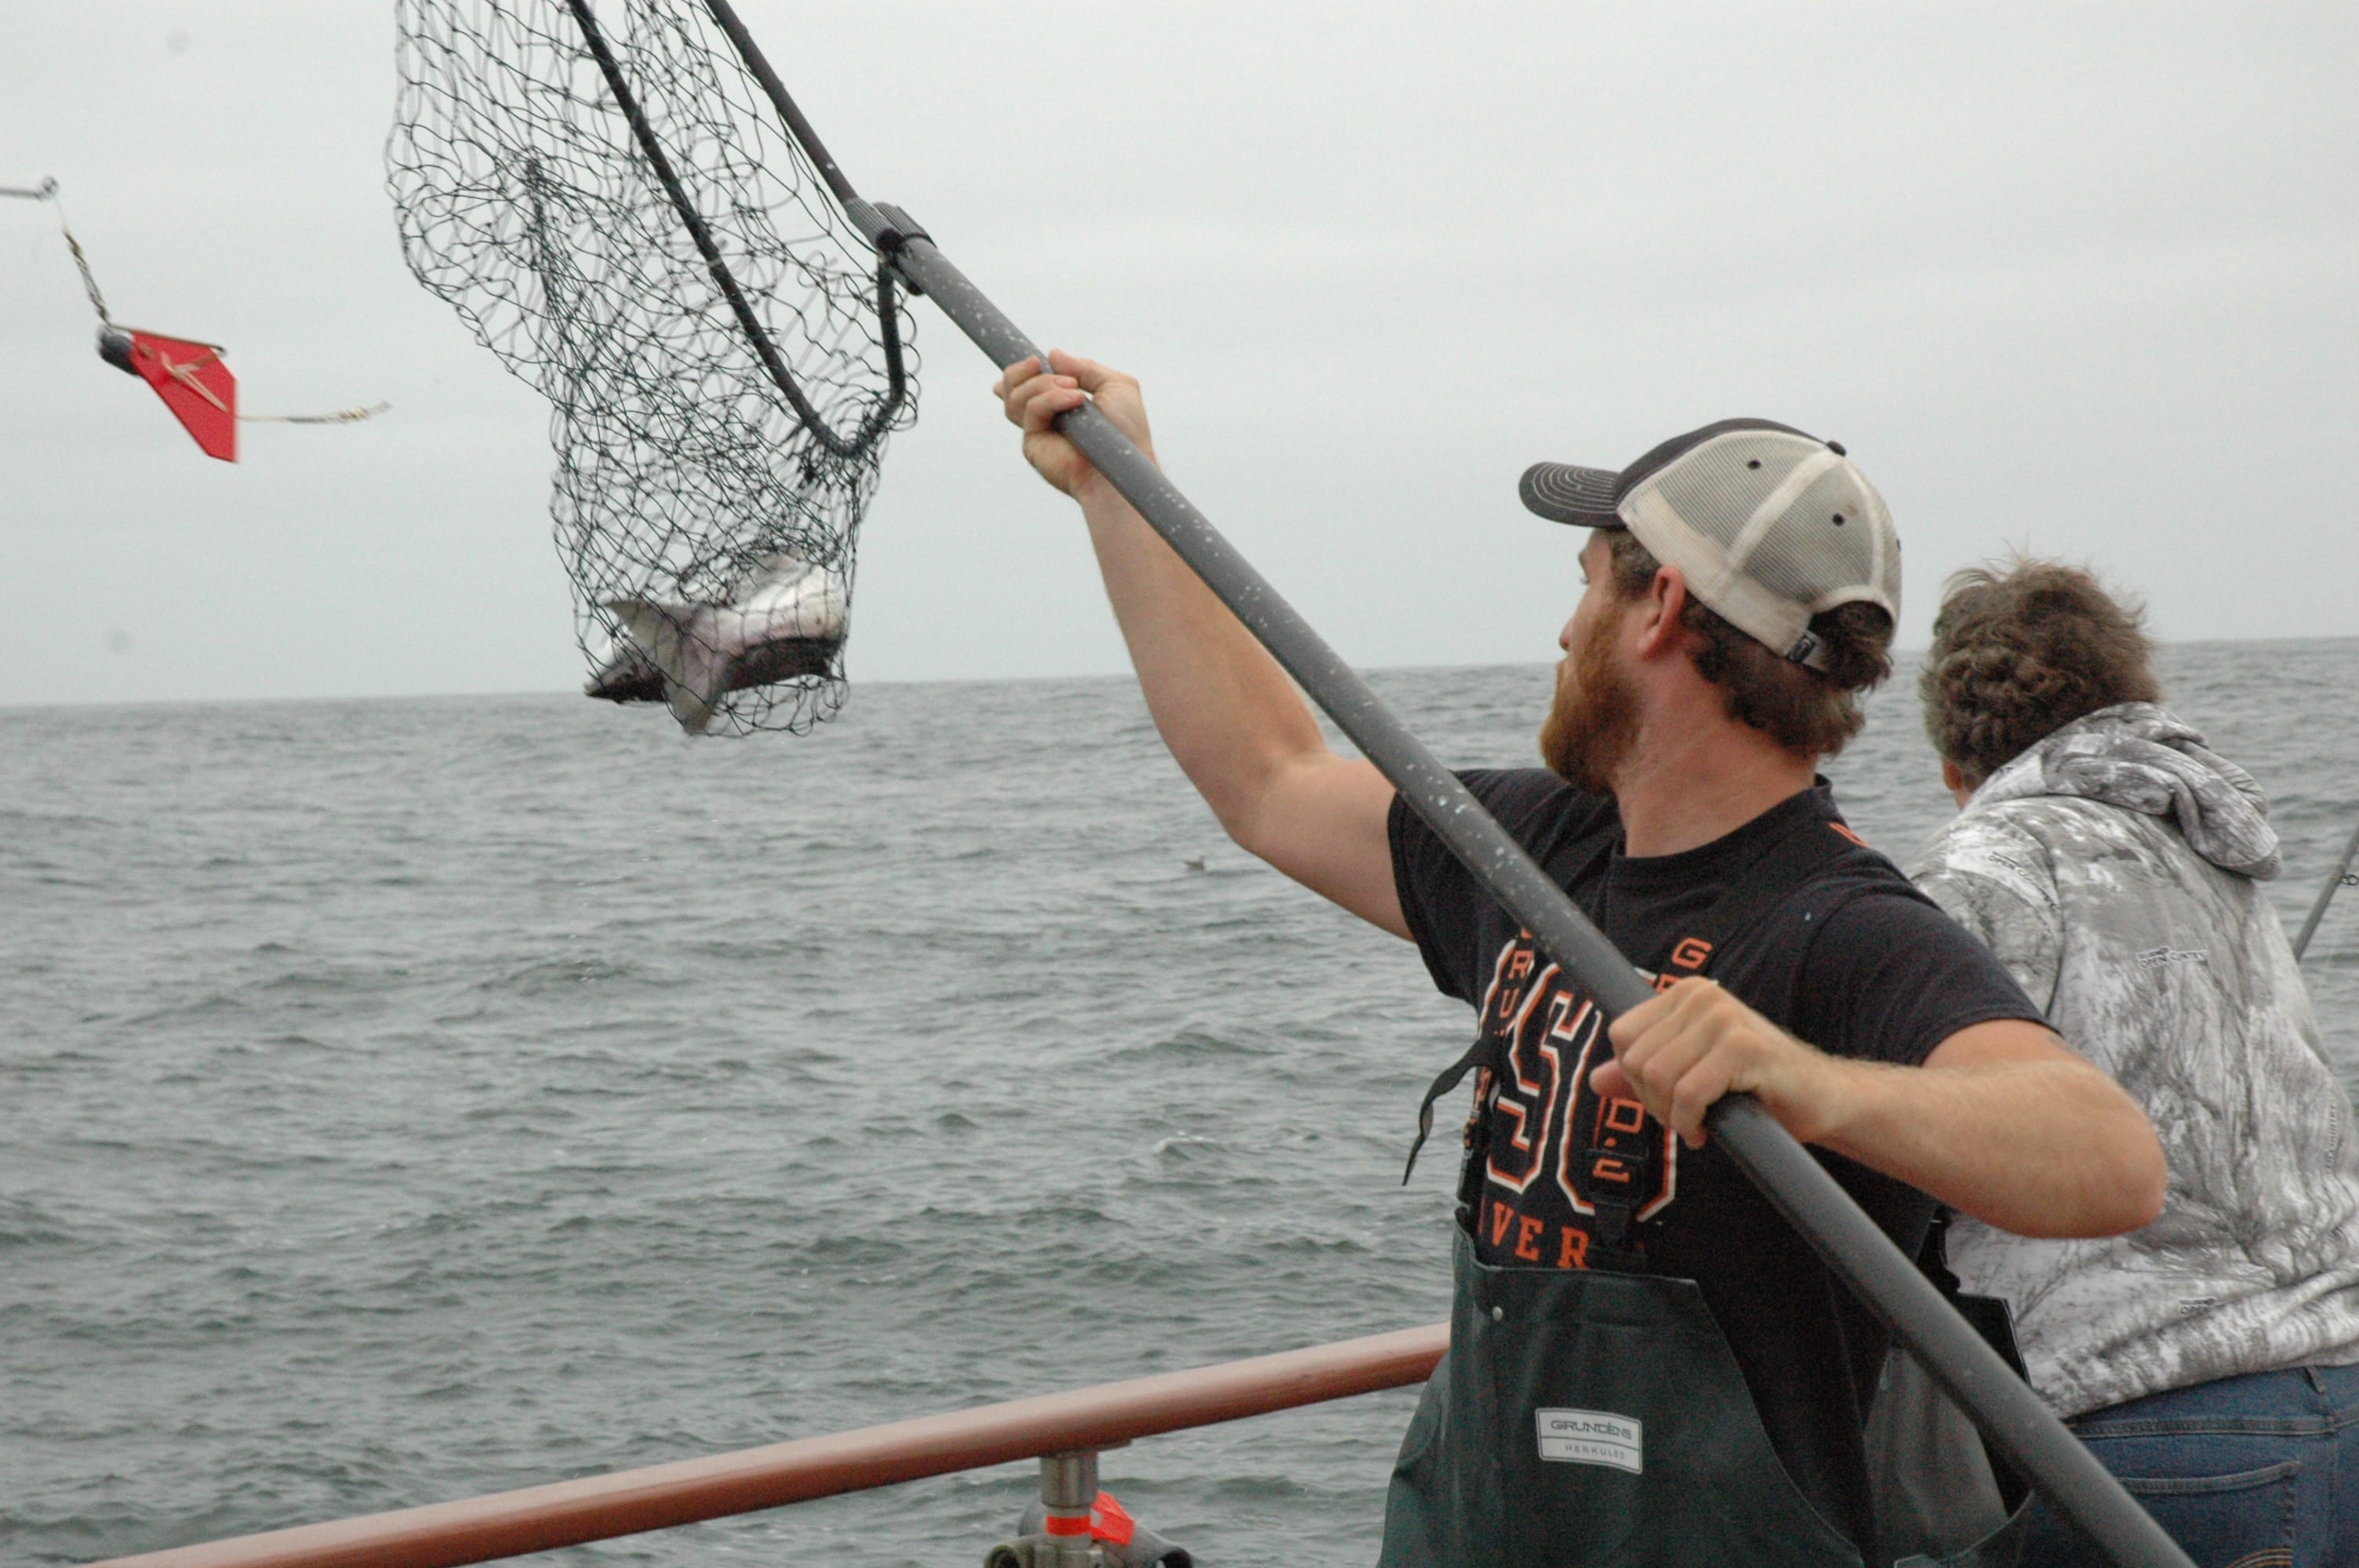 Salmon fishing off the mouth of the Columbia River closed for the season, effective Sunday.